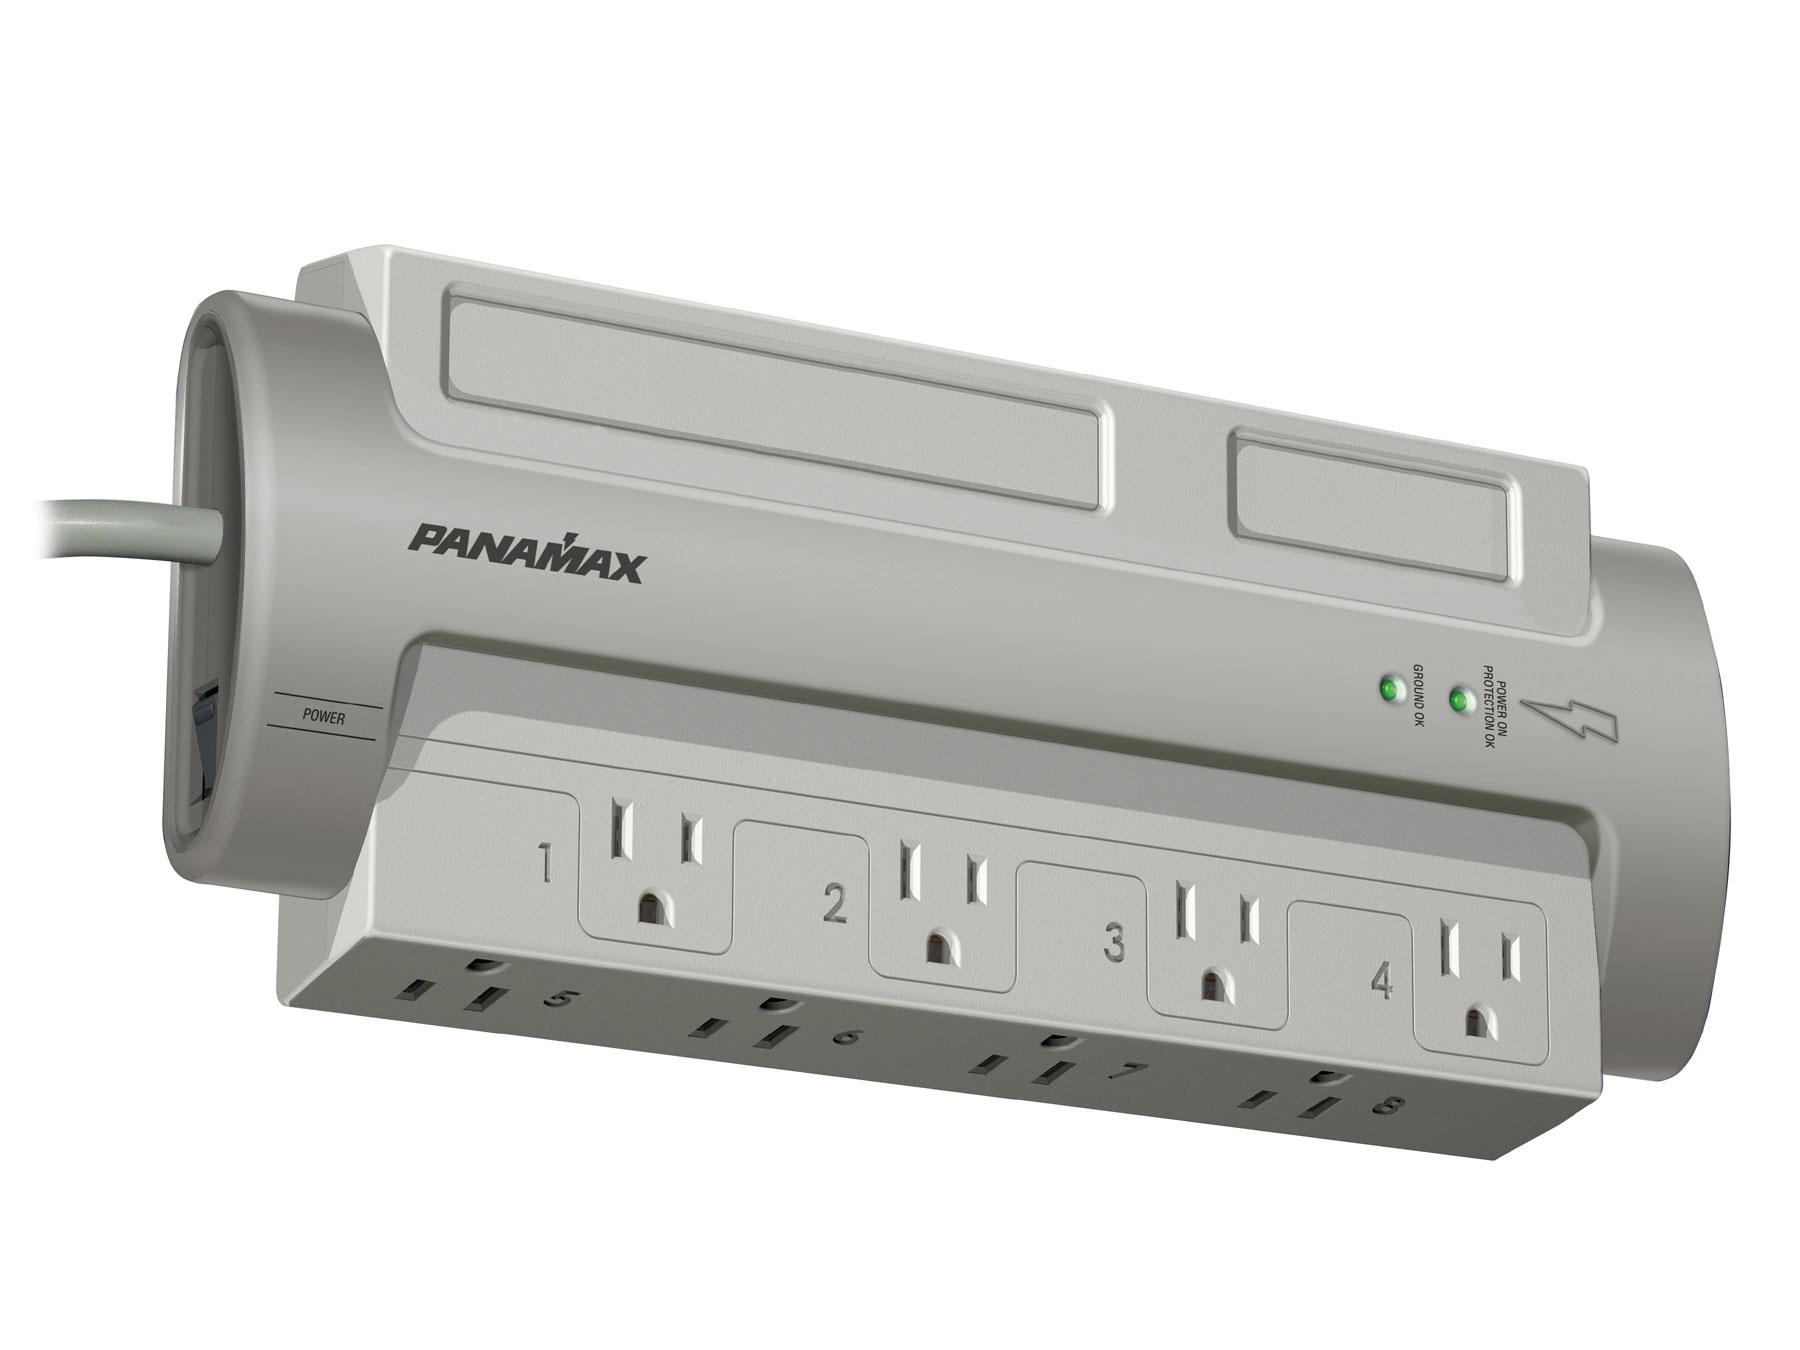 Panamax PM8-EX Noise Filtration/Surge Protection For All Home/Office Equipment